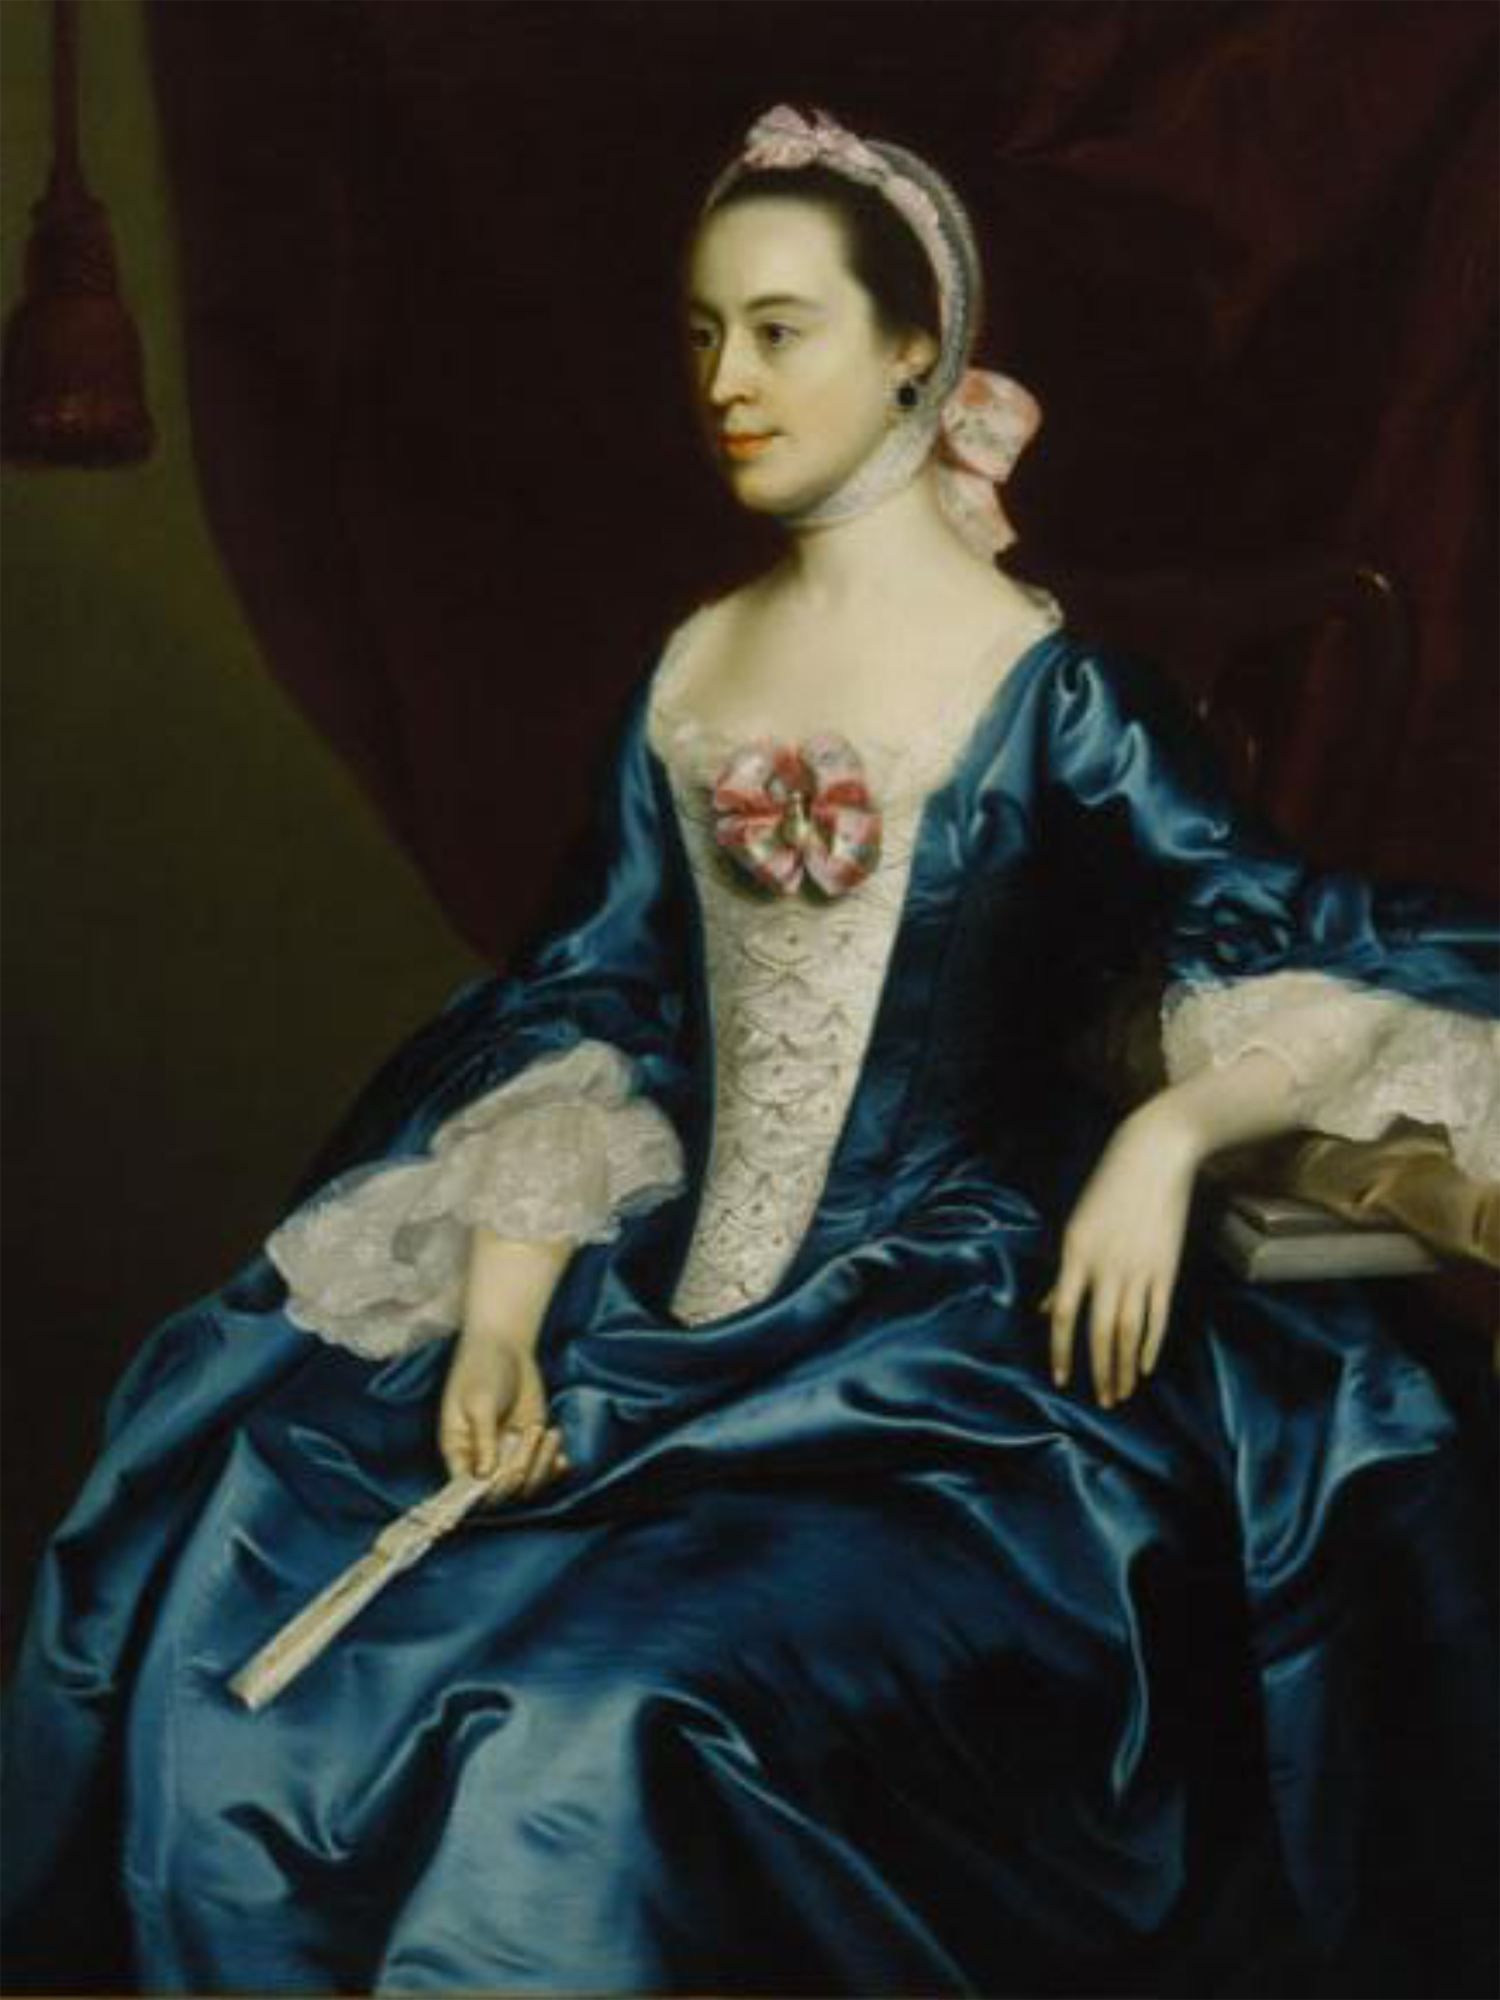 Portrait of a Lady in a Blue Dress, 1763, by John Singleton Copley. Source: Terra Foundation for American Art, Chicago / Art Resource, NY